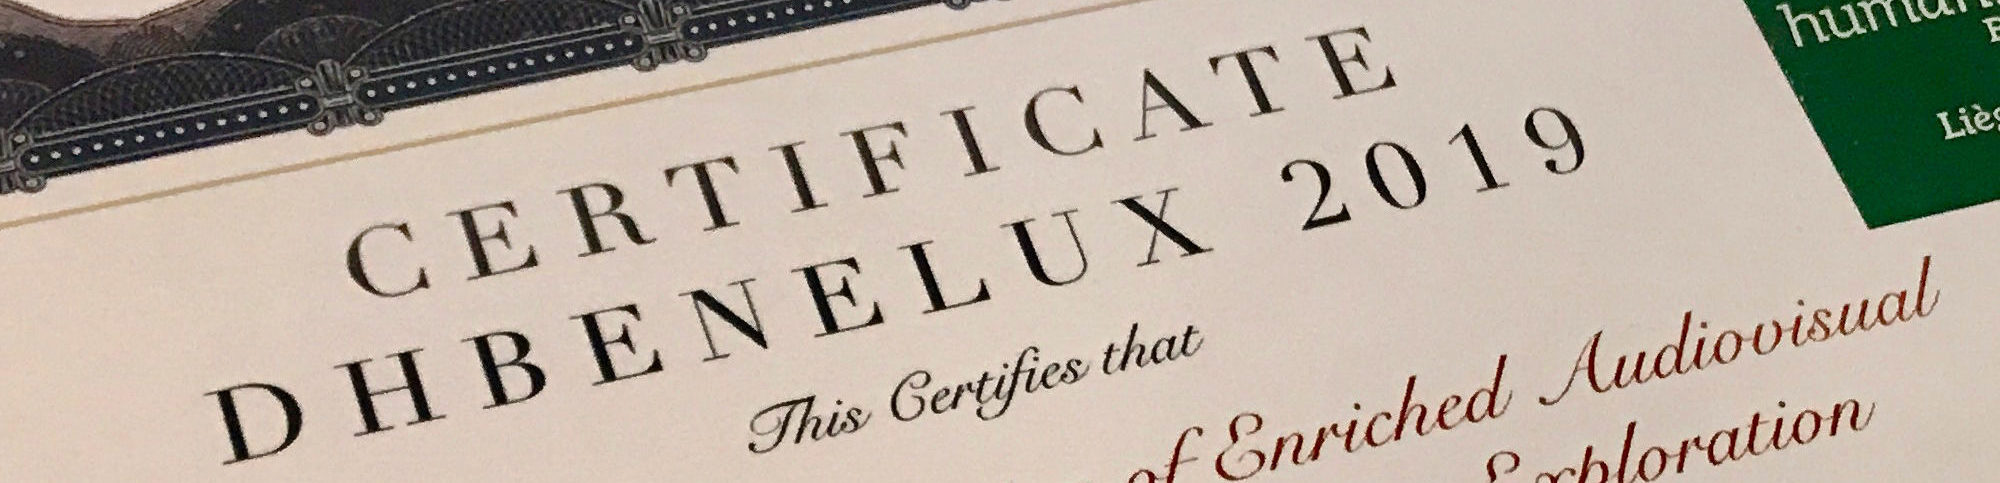 DH Benelux certificate